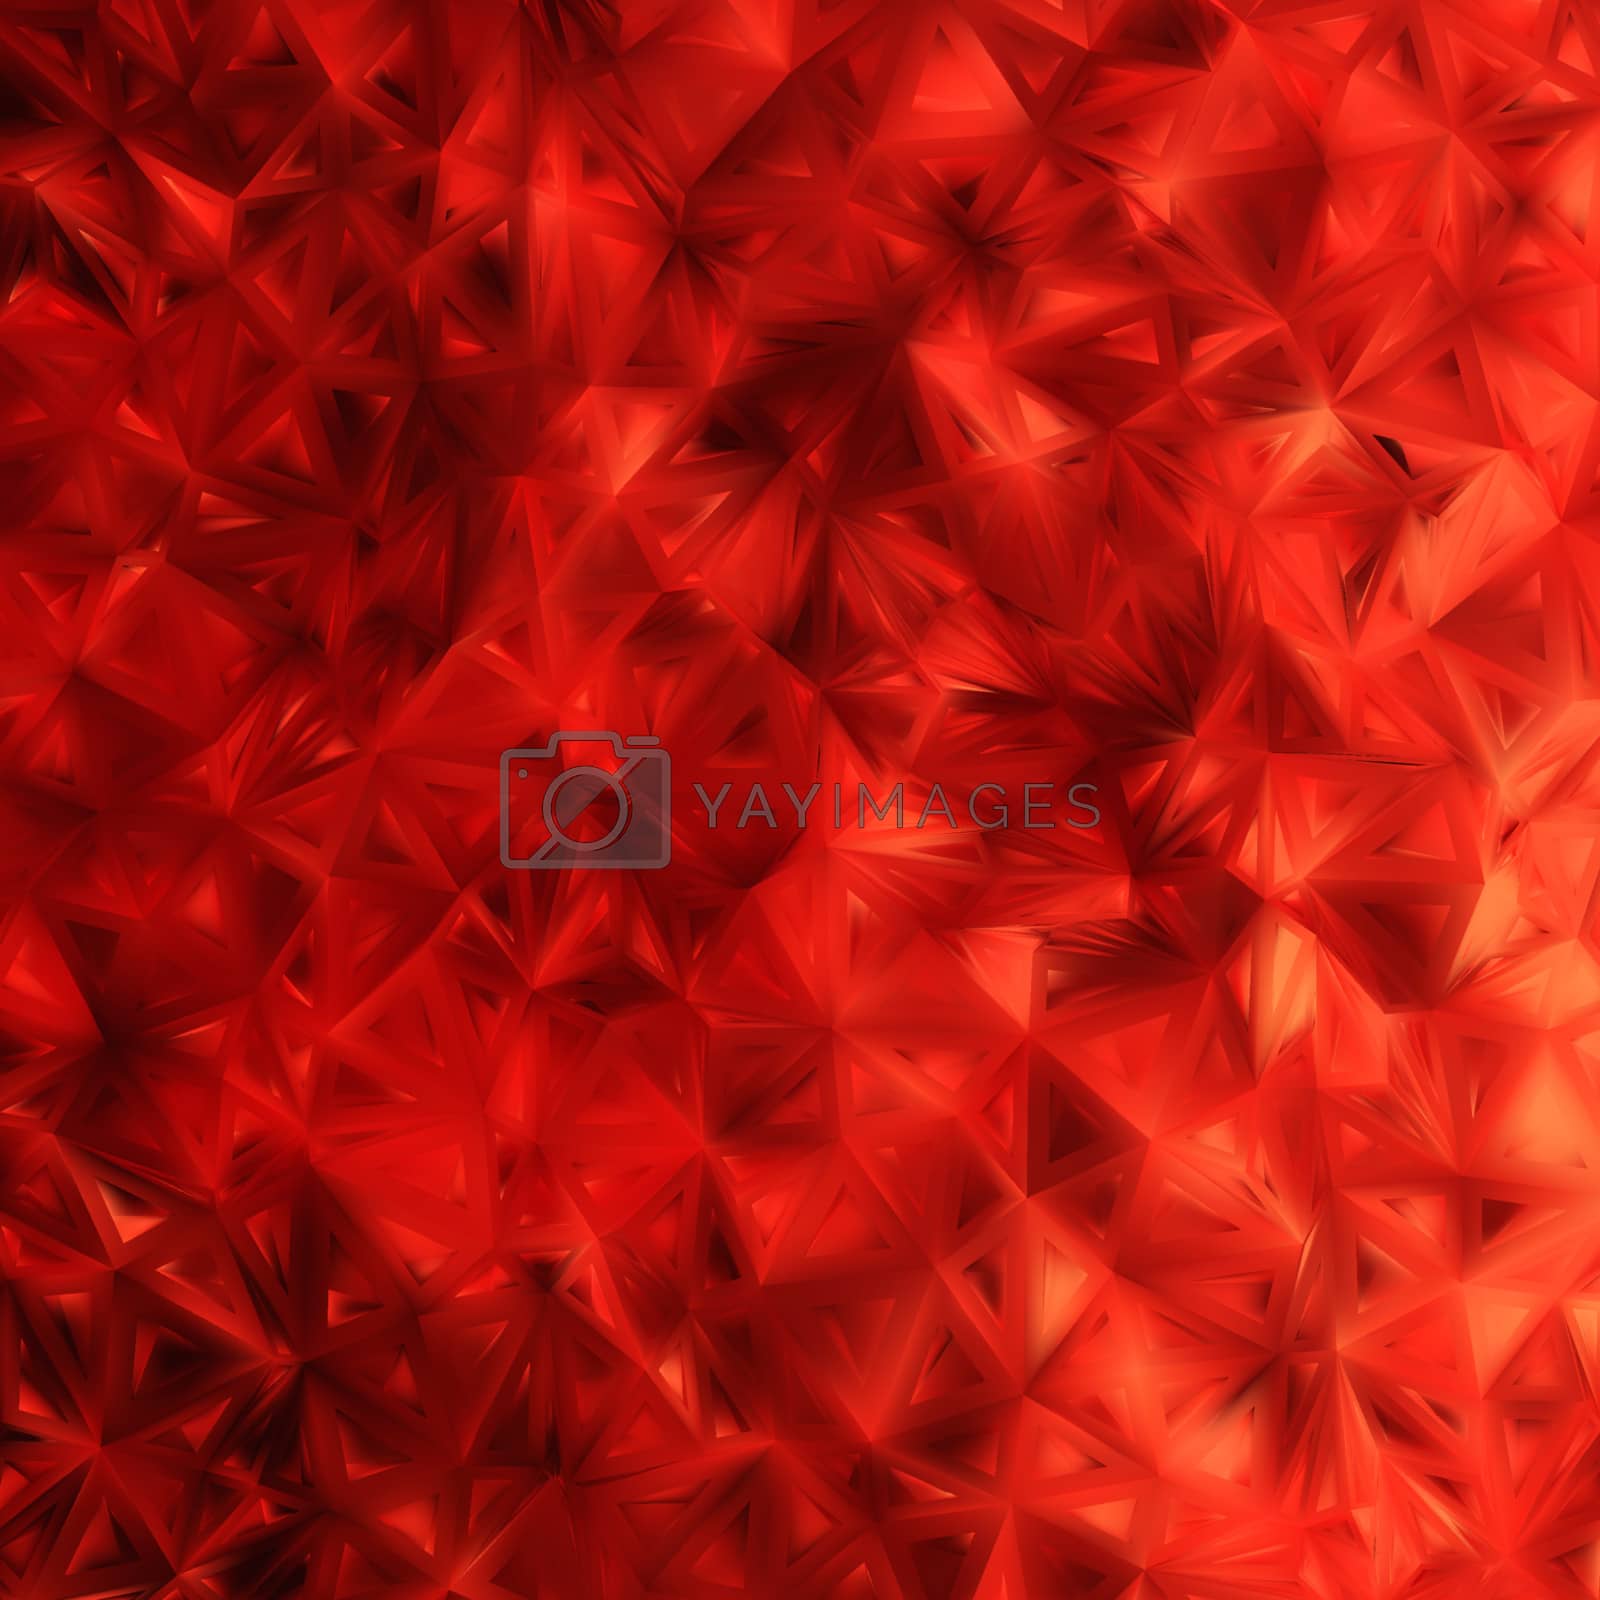 Royalty free image of Red glitter background. EPS 8 by Petrov_Vladimir